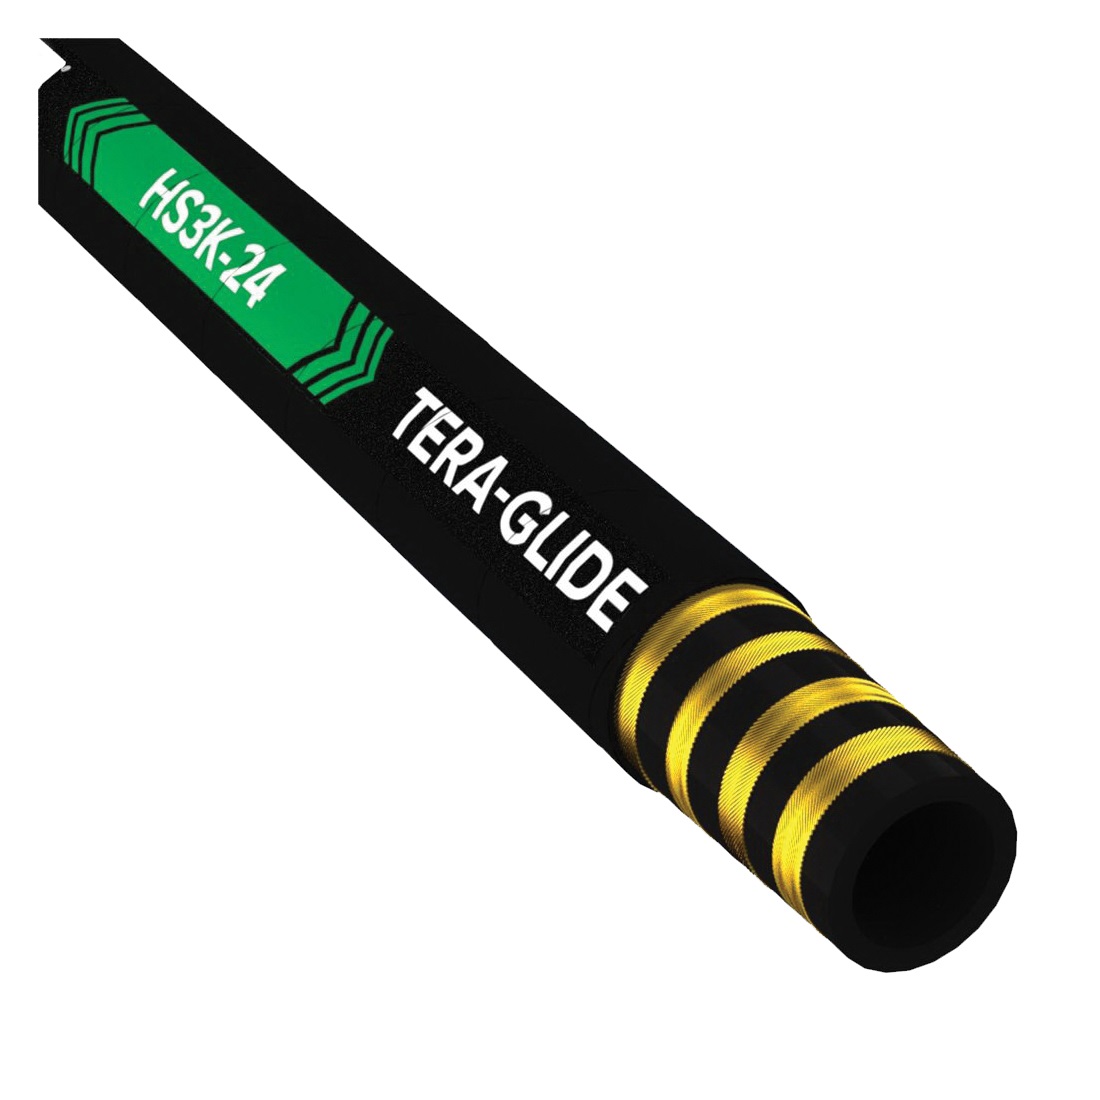 TEXCEL® TERA-GLIDE HS3K Series HS3K-24 Medium-Pressure Hydraulic Hose, #24 Nominal, 3000 psi, Synthetic Rubber Tube